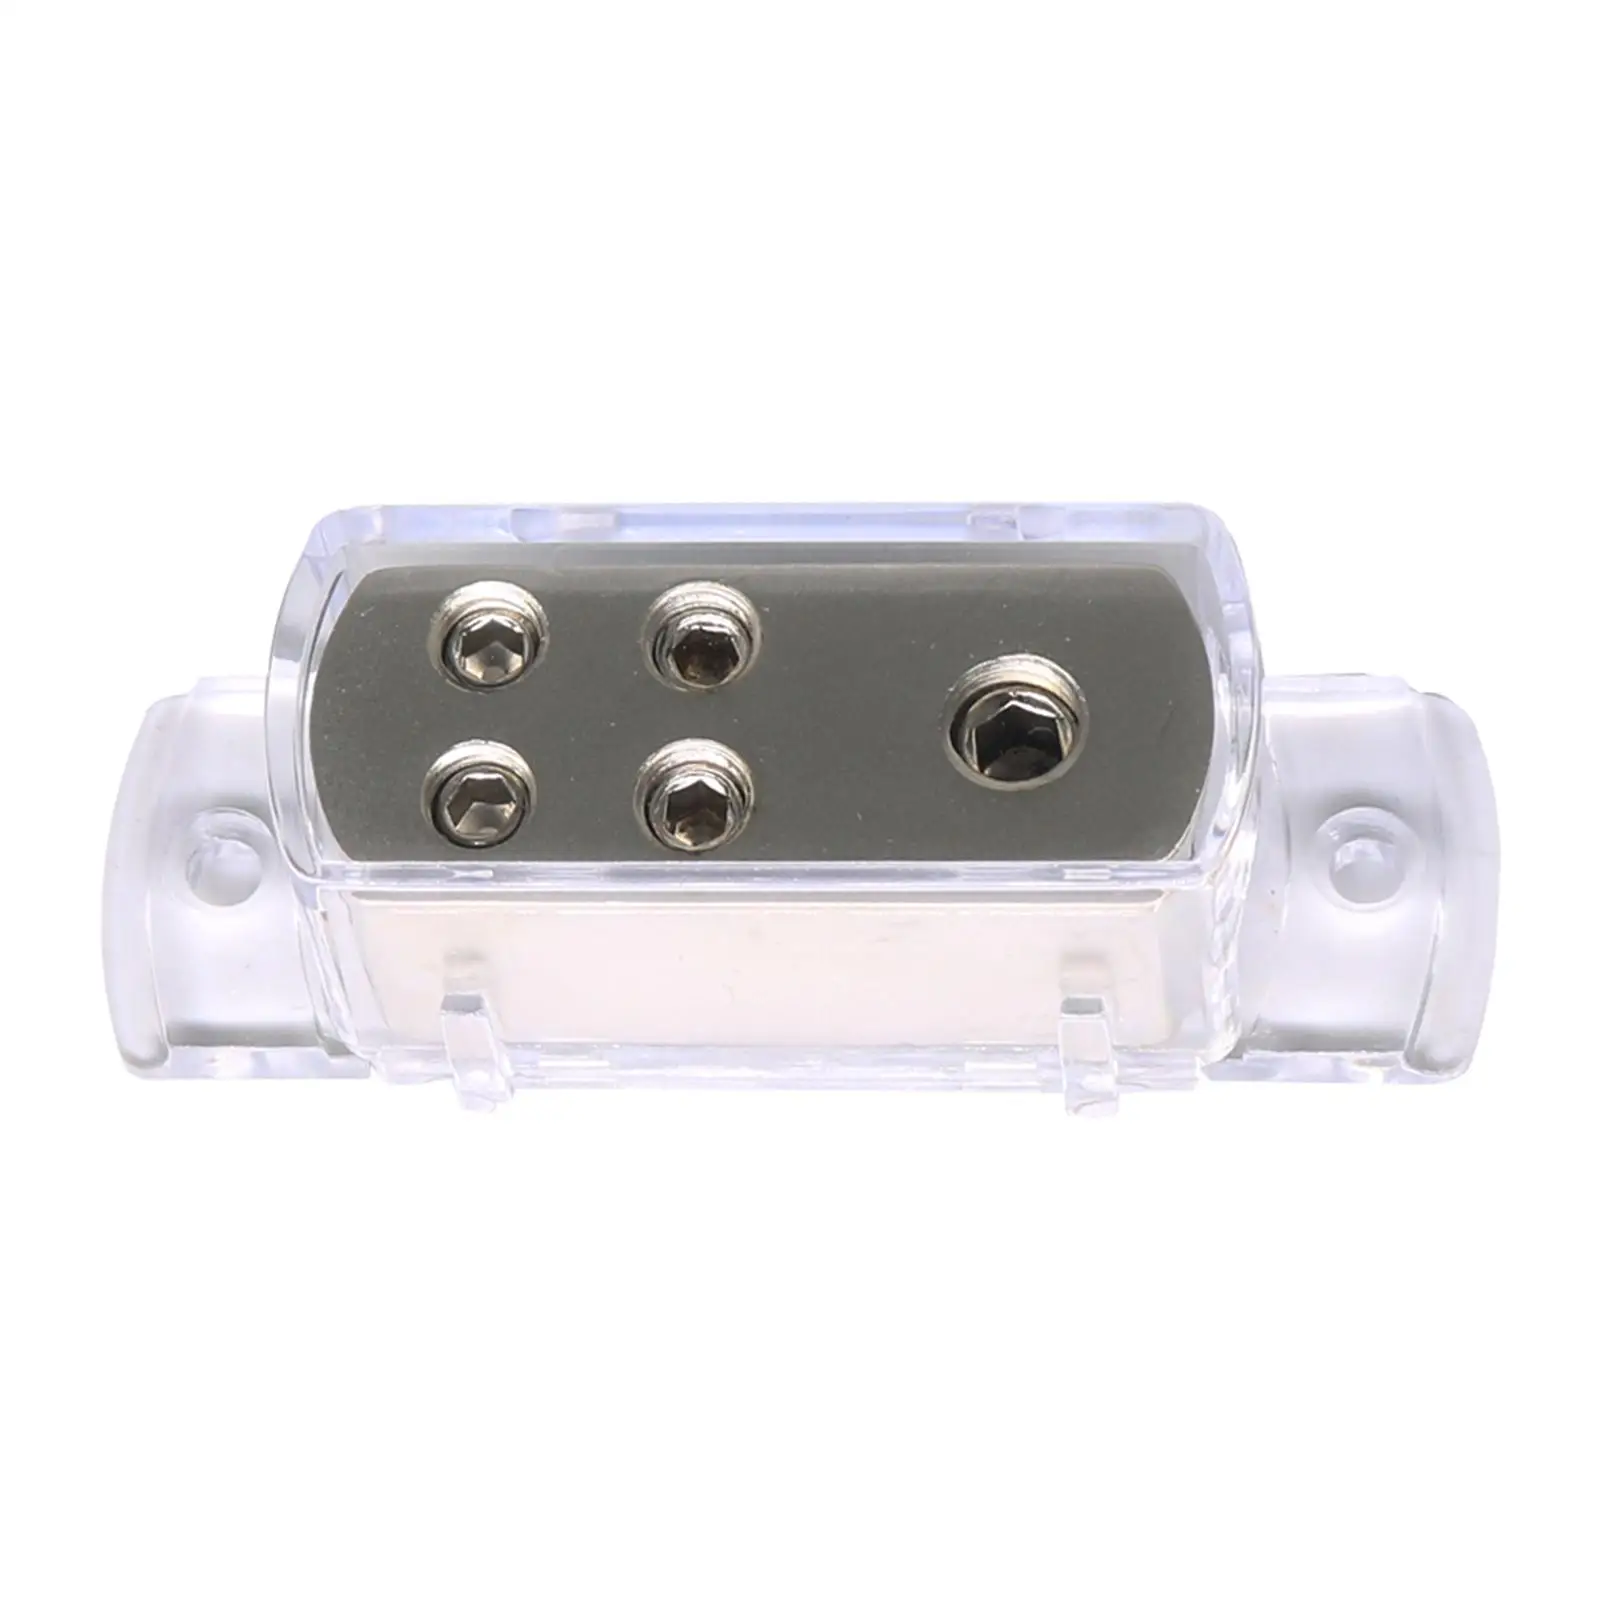 4/4-Way Car Audio Stereo Amp Power/Ground Cable Wire Distribution Block